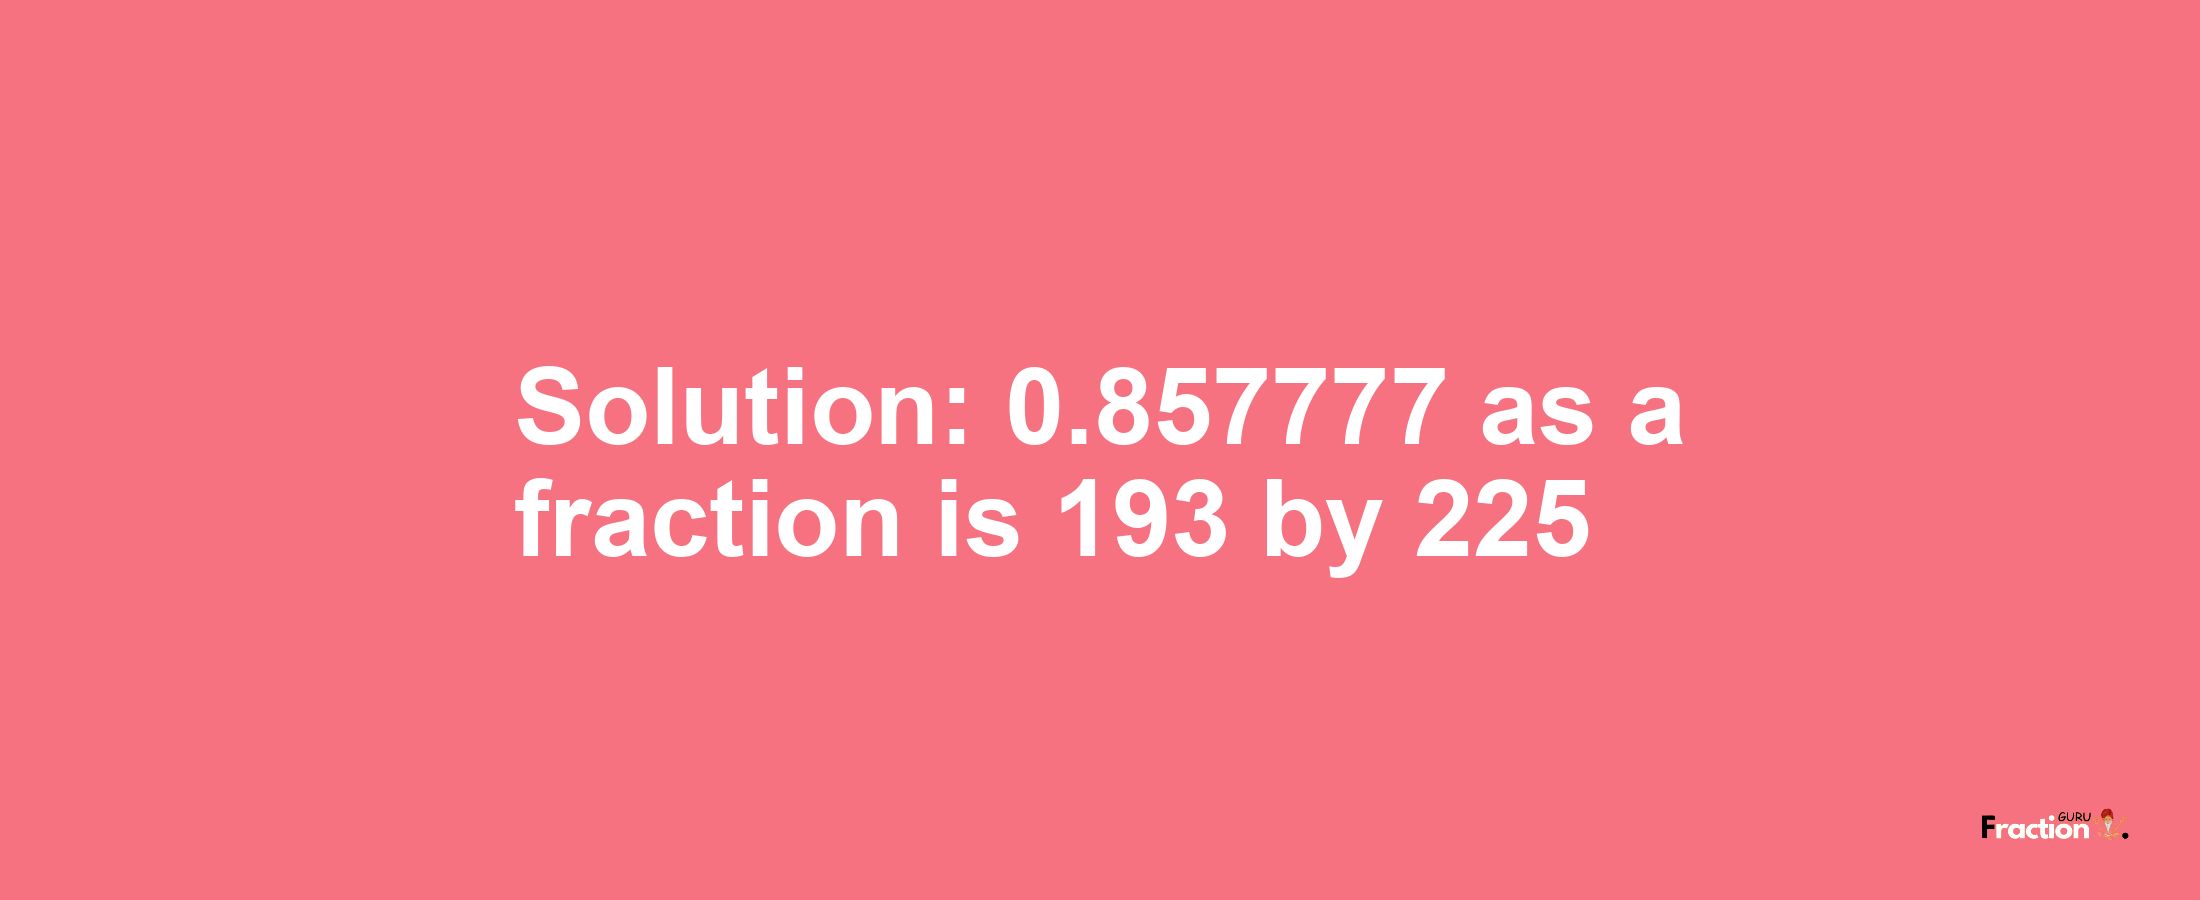 Solution:0.857777 as a fraction is 193/225